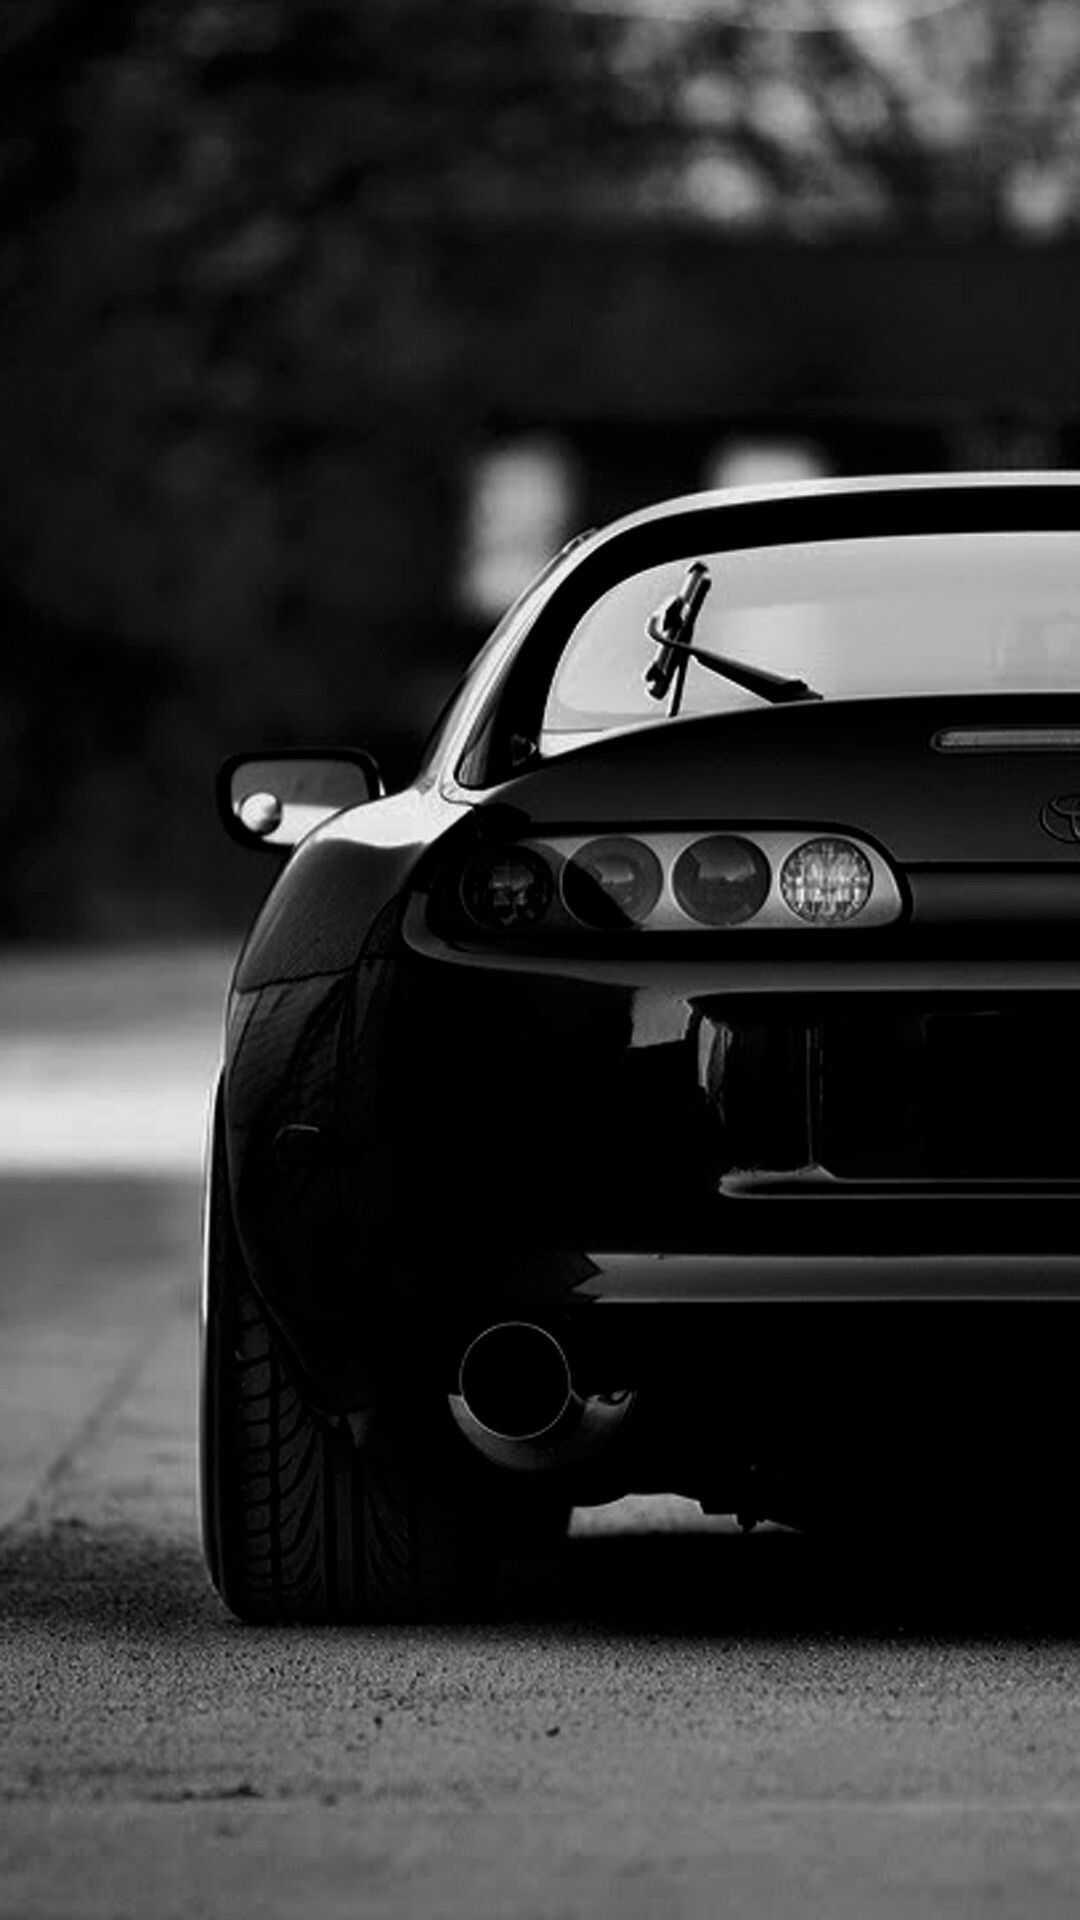 1080x1920 Toyota Supra Wallpaper Awesome Free HD Wallpapers